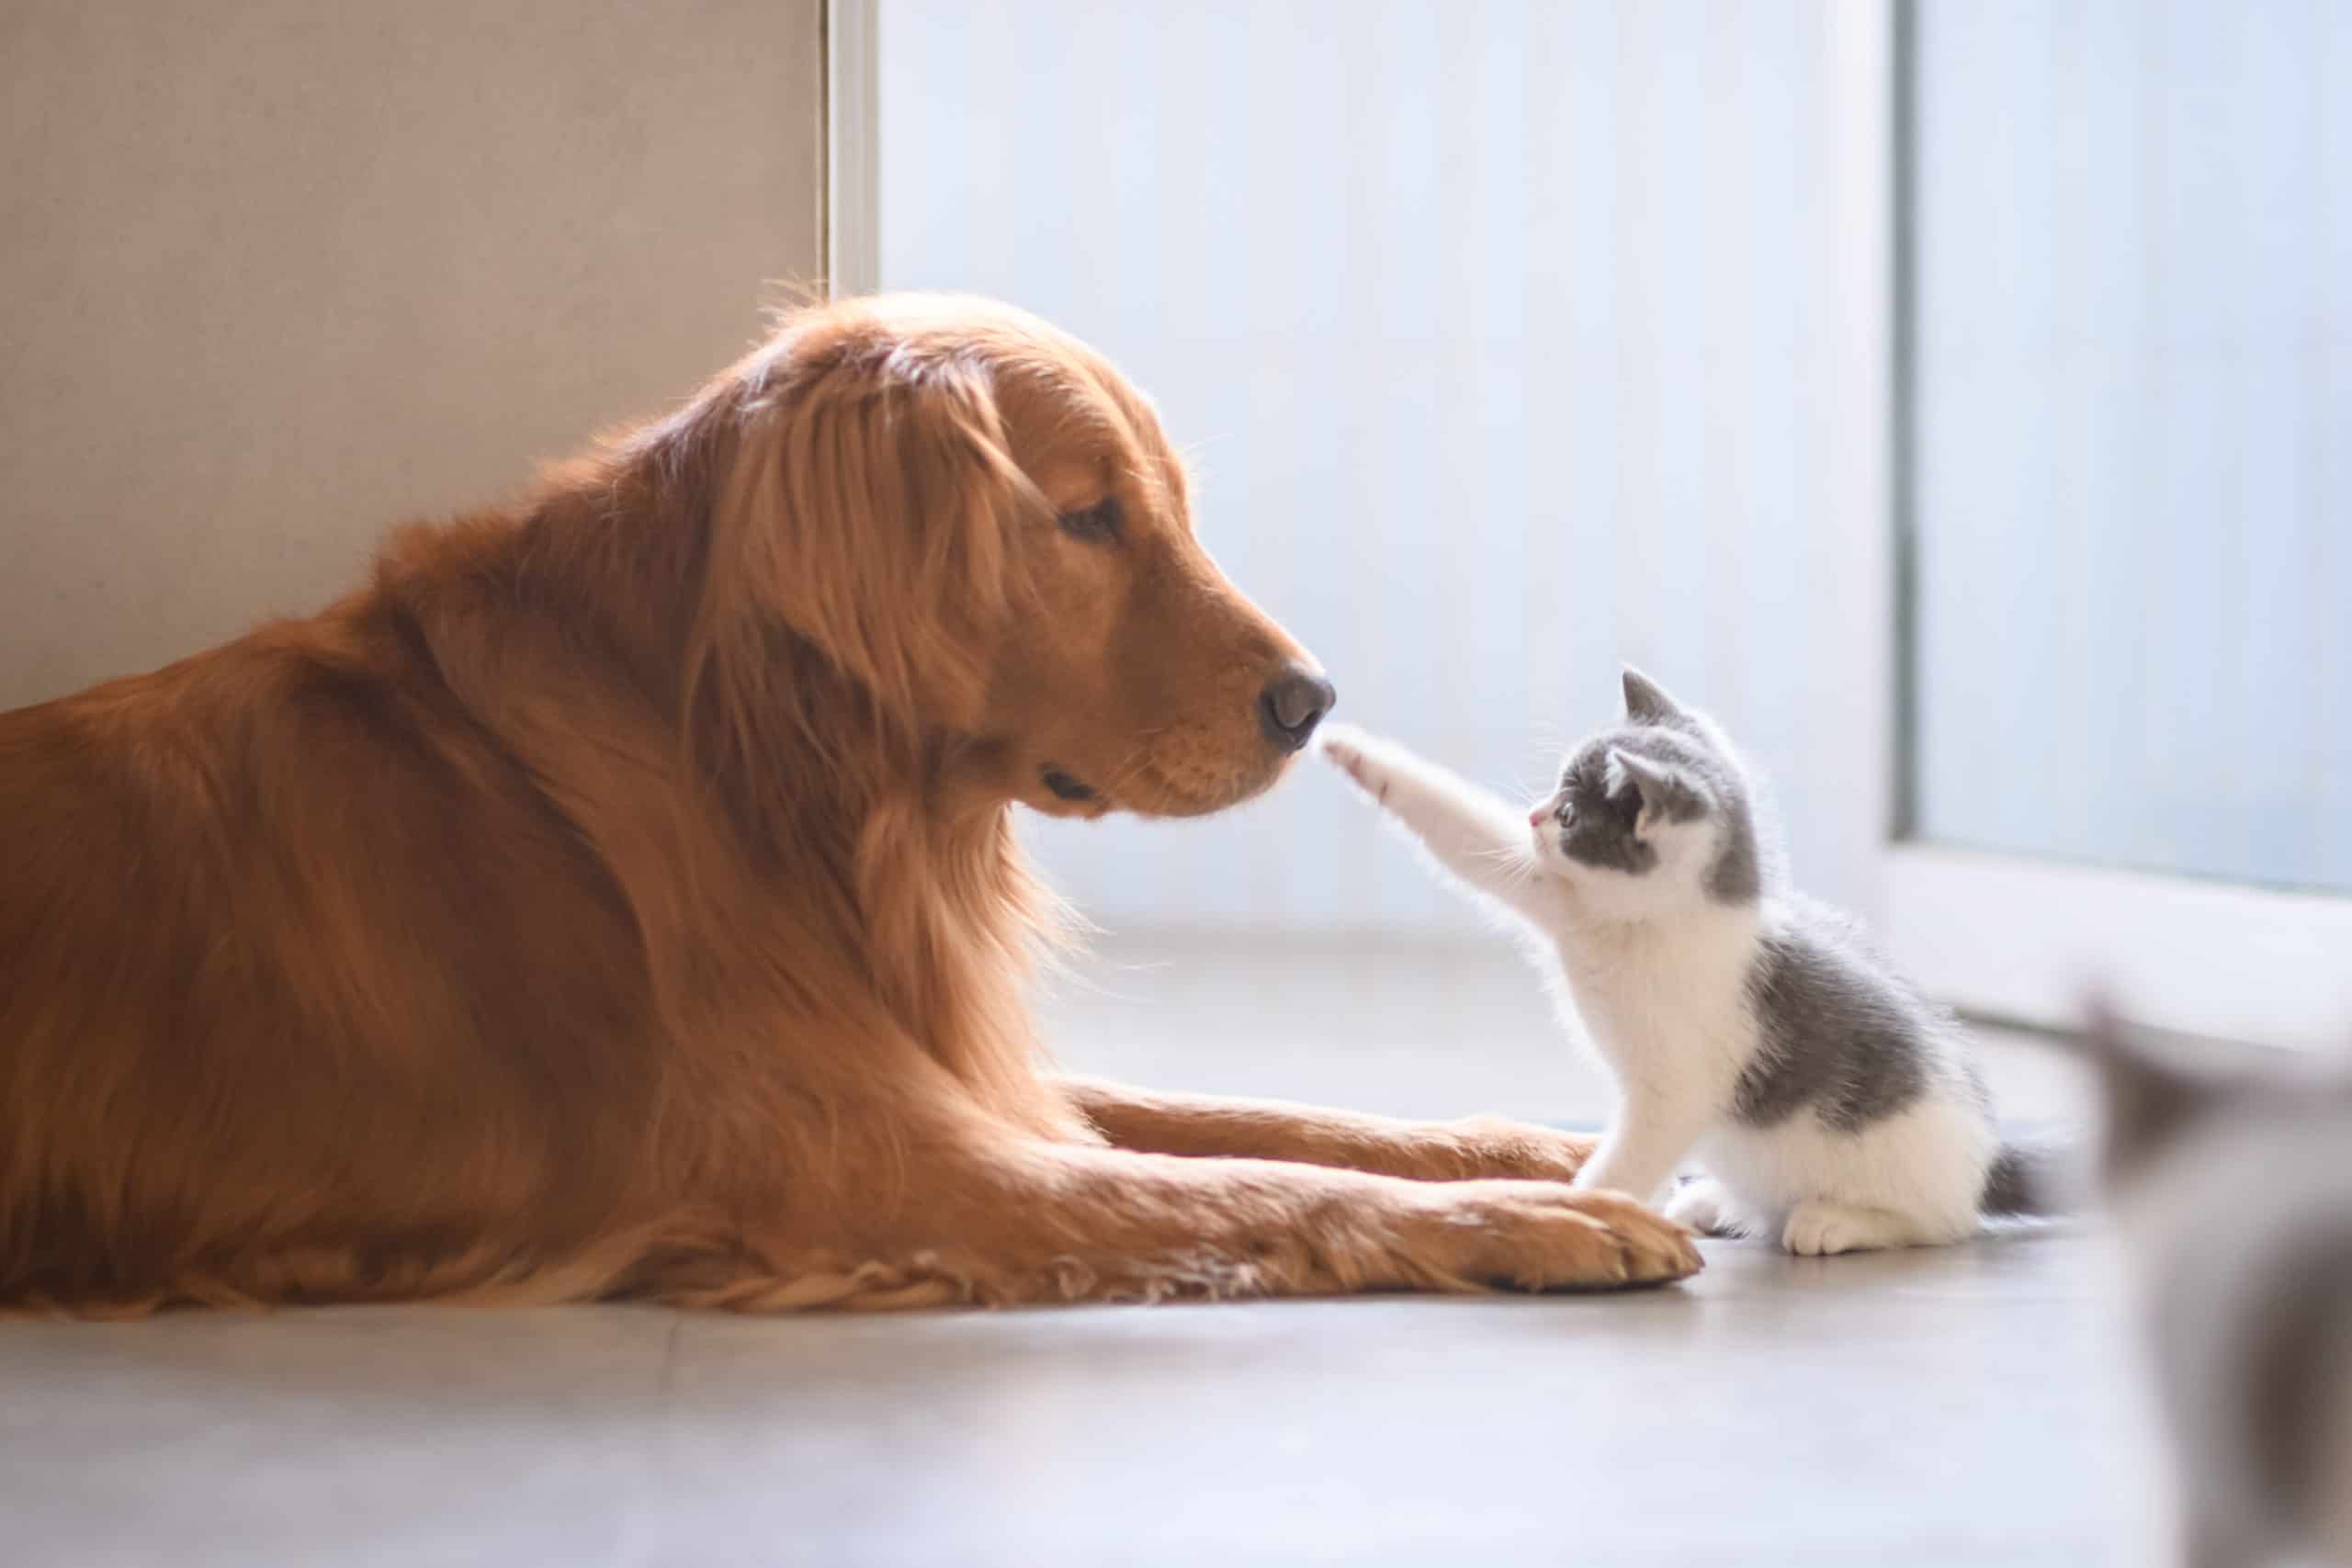 Why does my dog hate my cat?